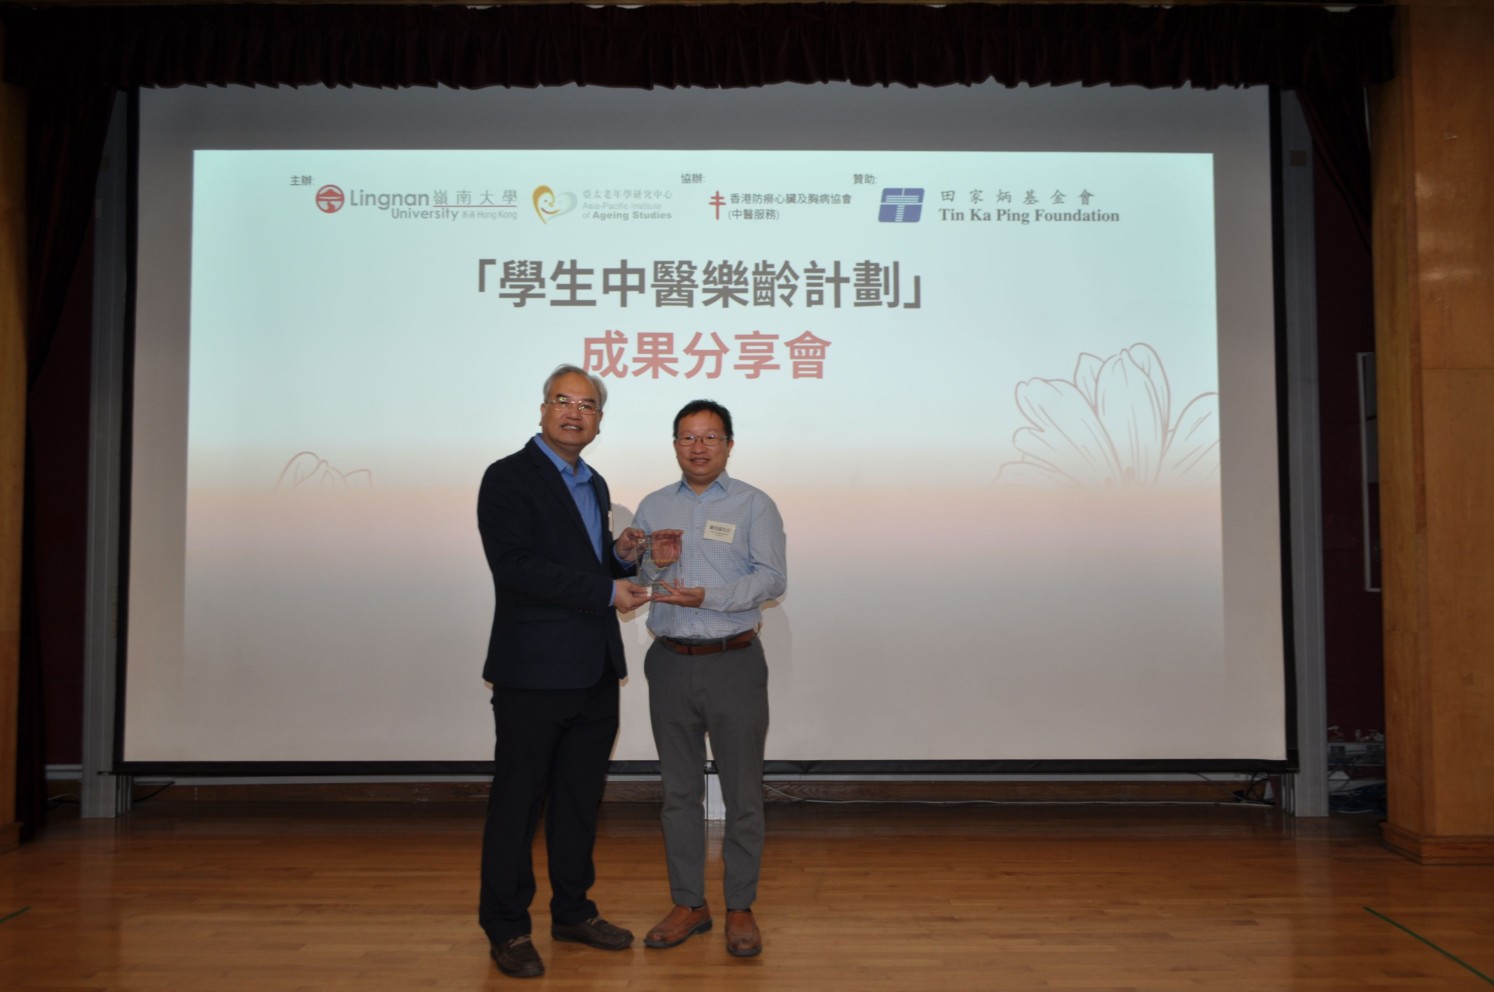 Prof Dickson Chan Chak-kwan (left) presents a souvenir to the representative of the Hong Kong Tuberculosis, Chest and Heart Diseases Association (right).